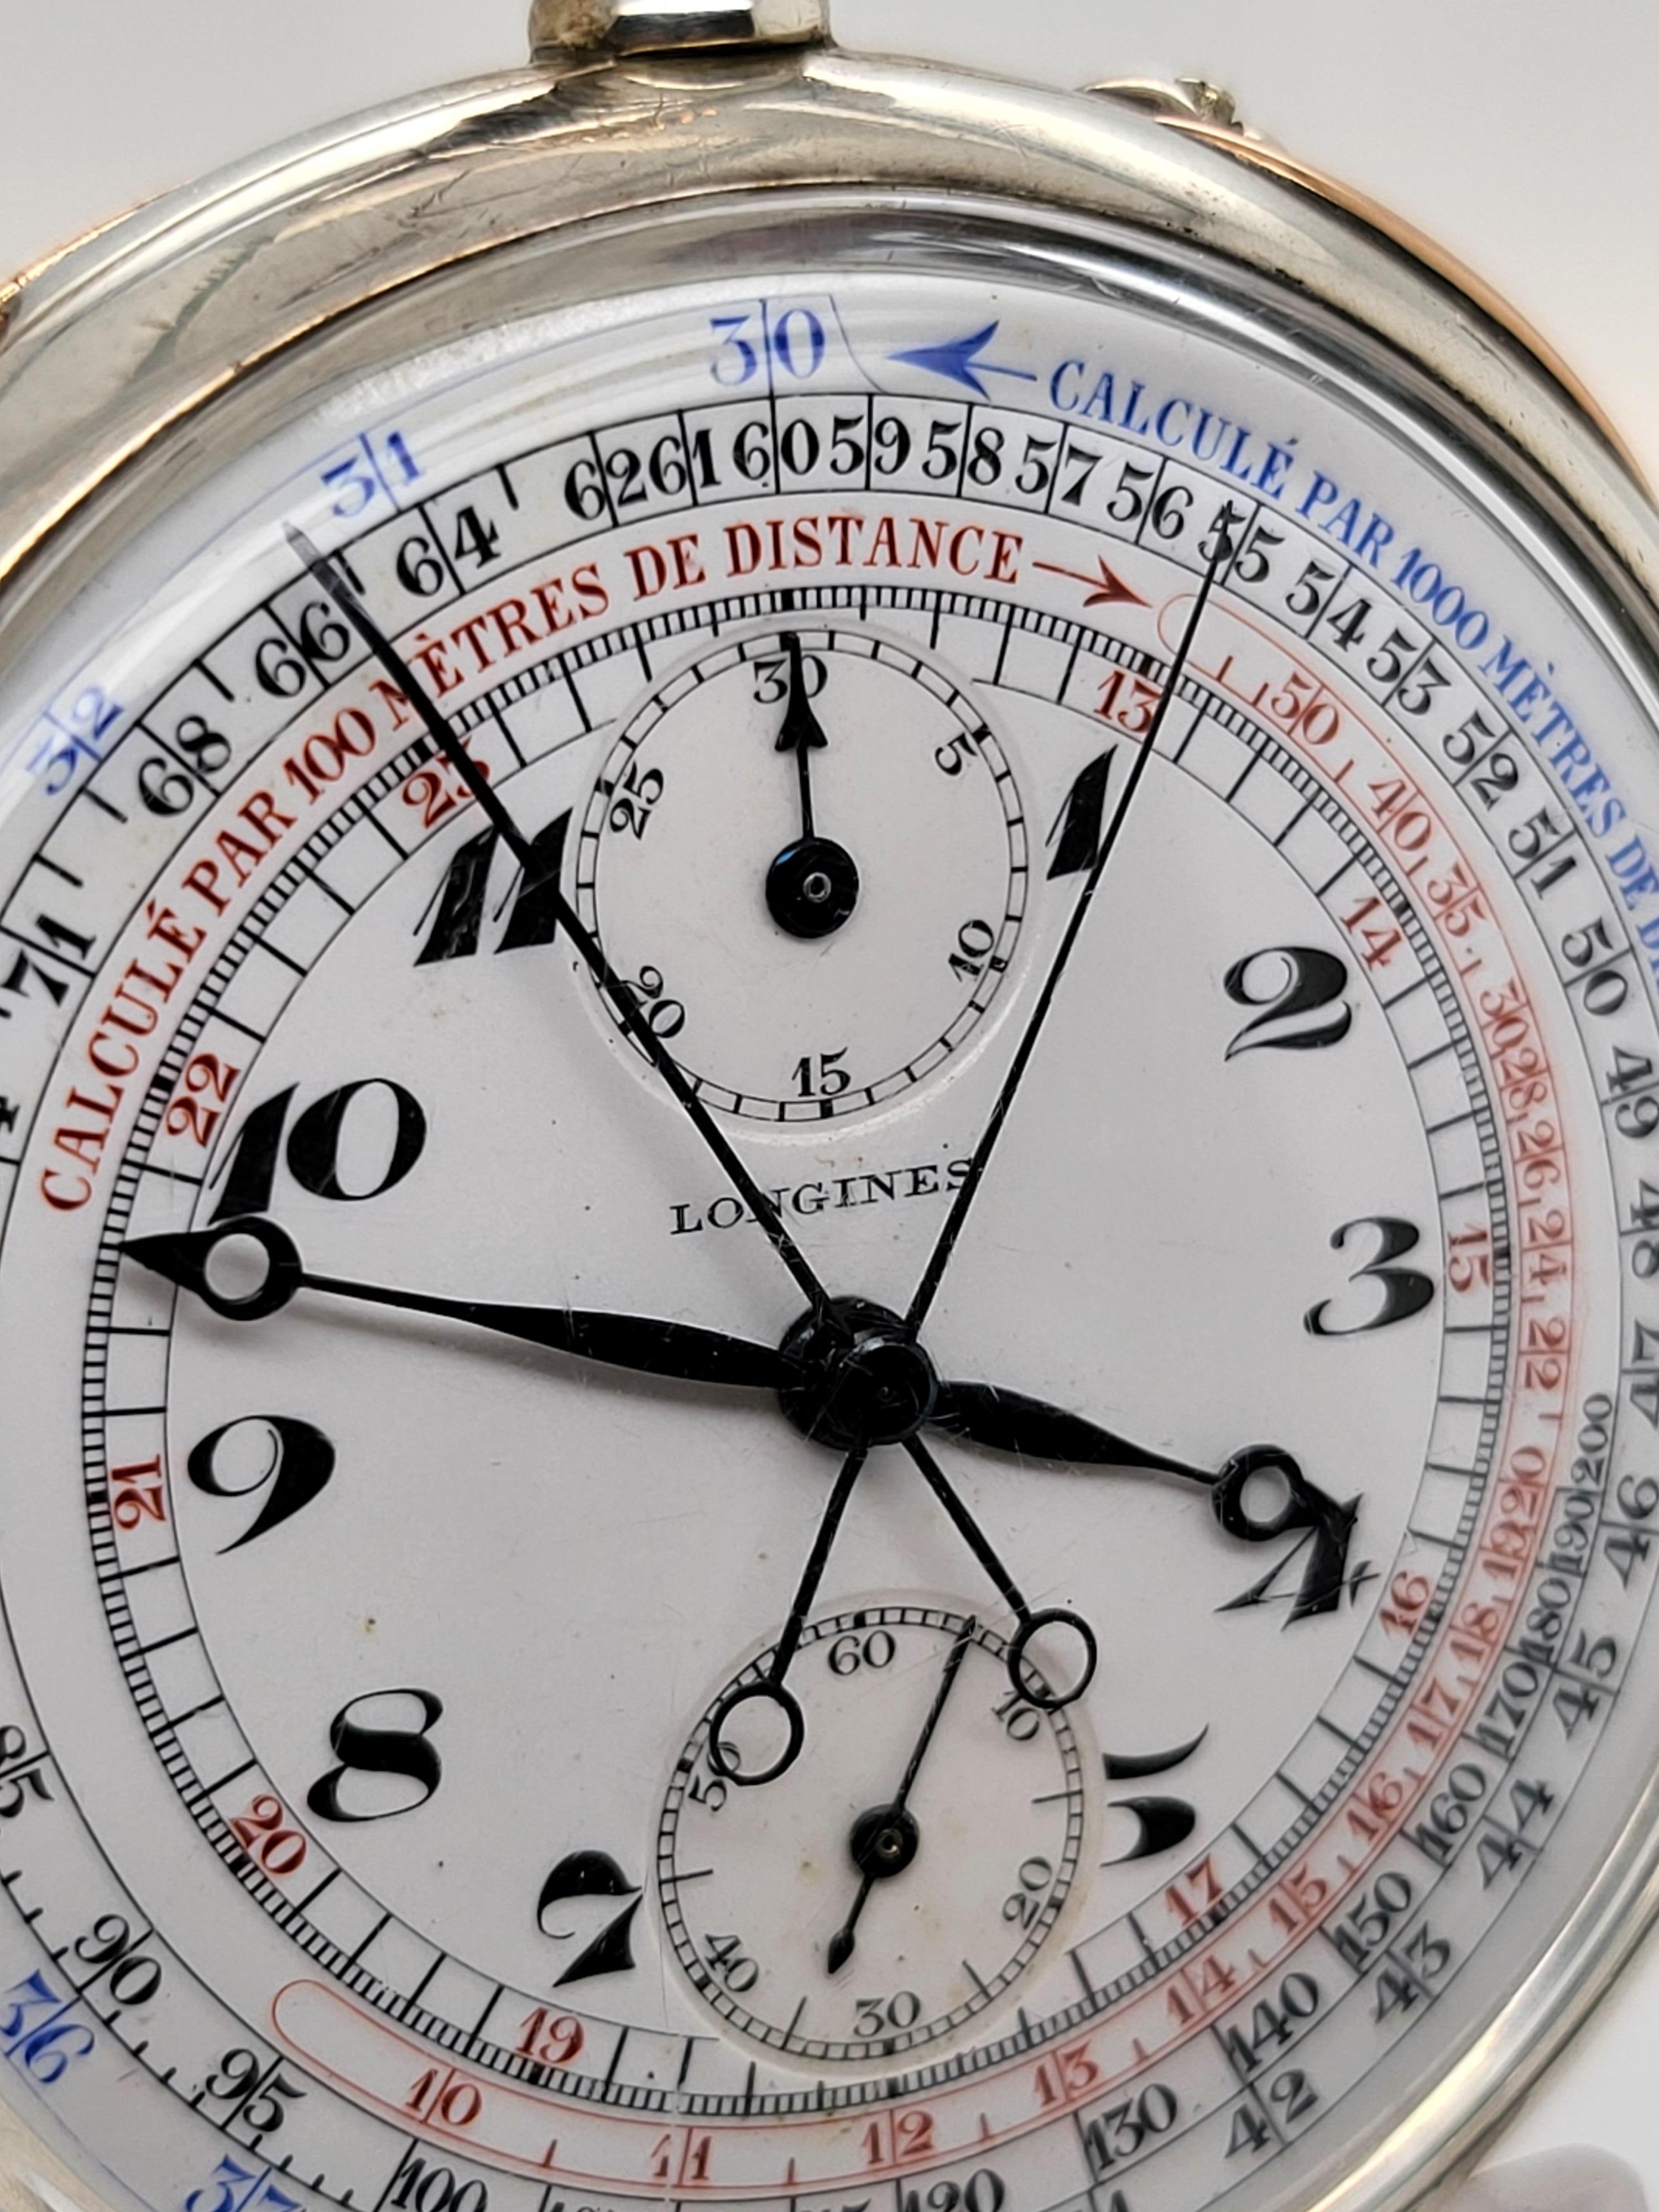 Longines Silver Pocket Watch Chronograph Rattrapante / Split Second  7 Grands Prix

Extermely rare and collectible !

Dial : Enamel with scales in different colors 

Case : 0.935 Solid SIlver